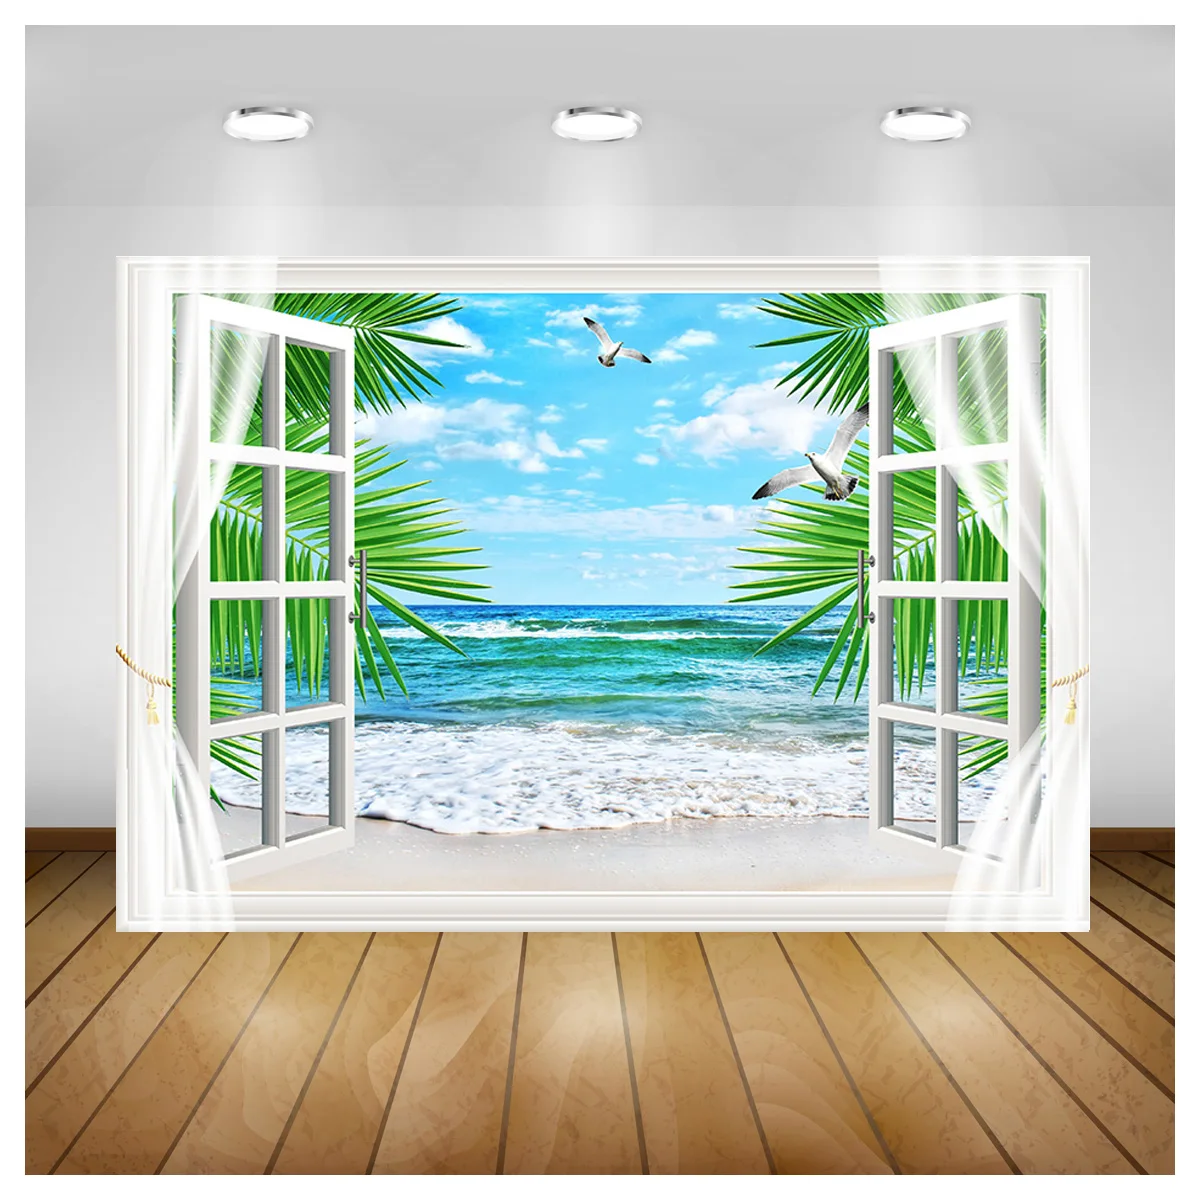 

SHUOZHIKE Window Beach Coconut Tree Photography Backdrops Props Scenery Mall Indoor Decoration Photo Studio Background HH-15